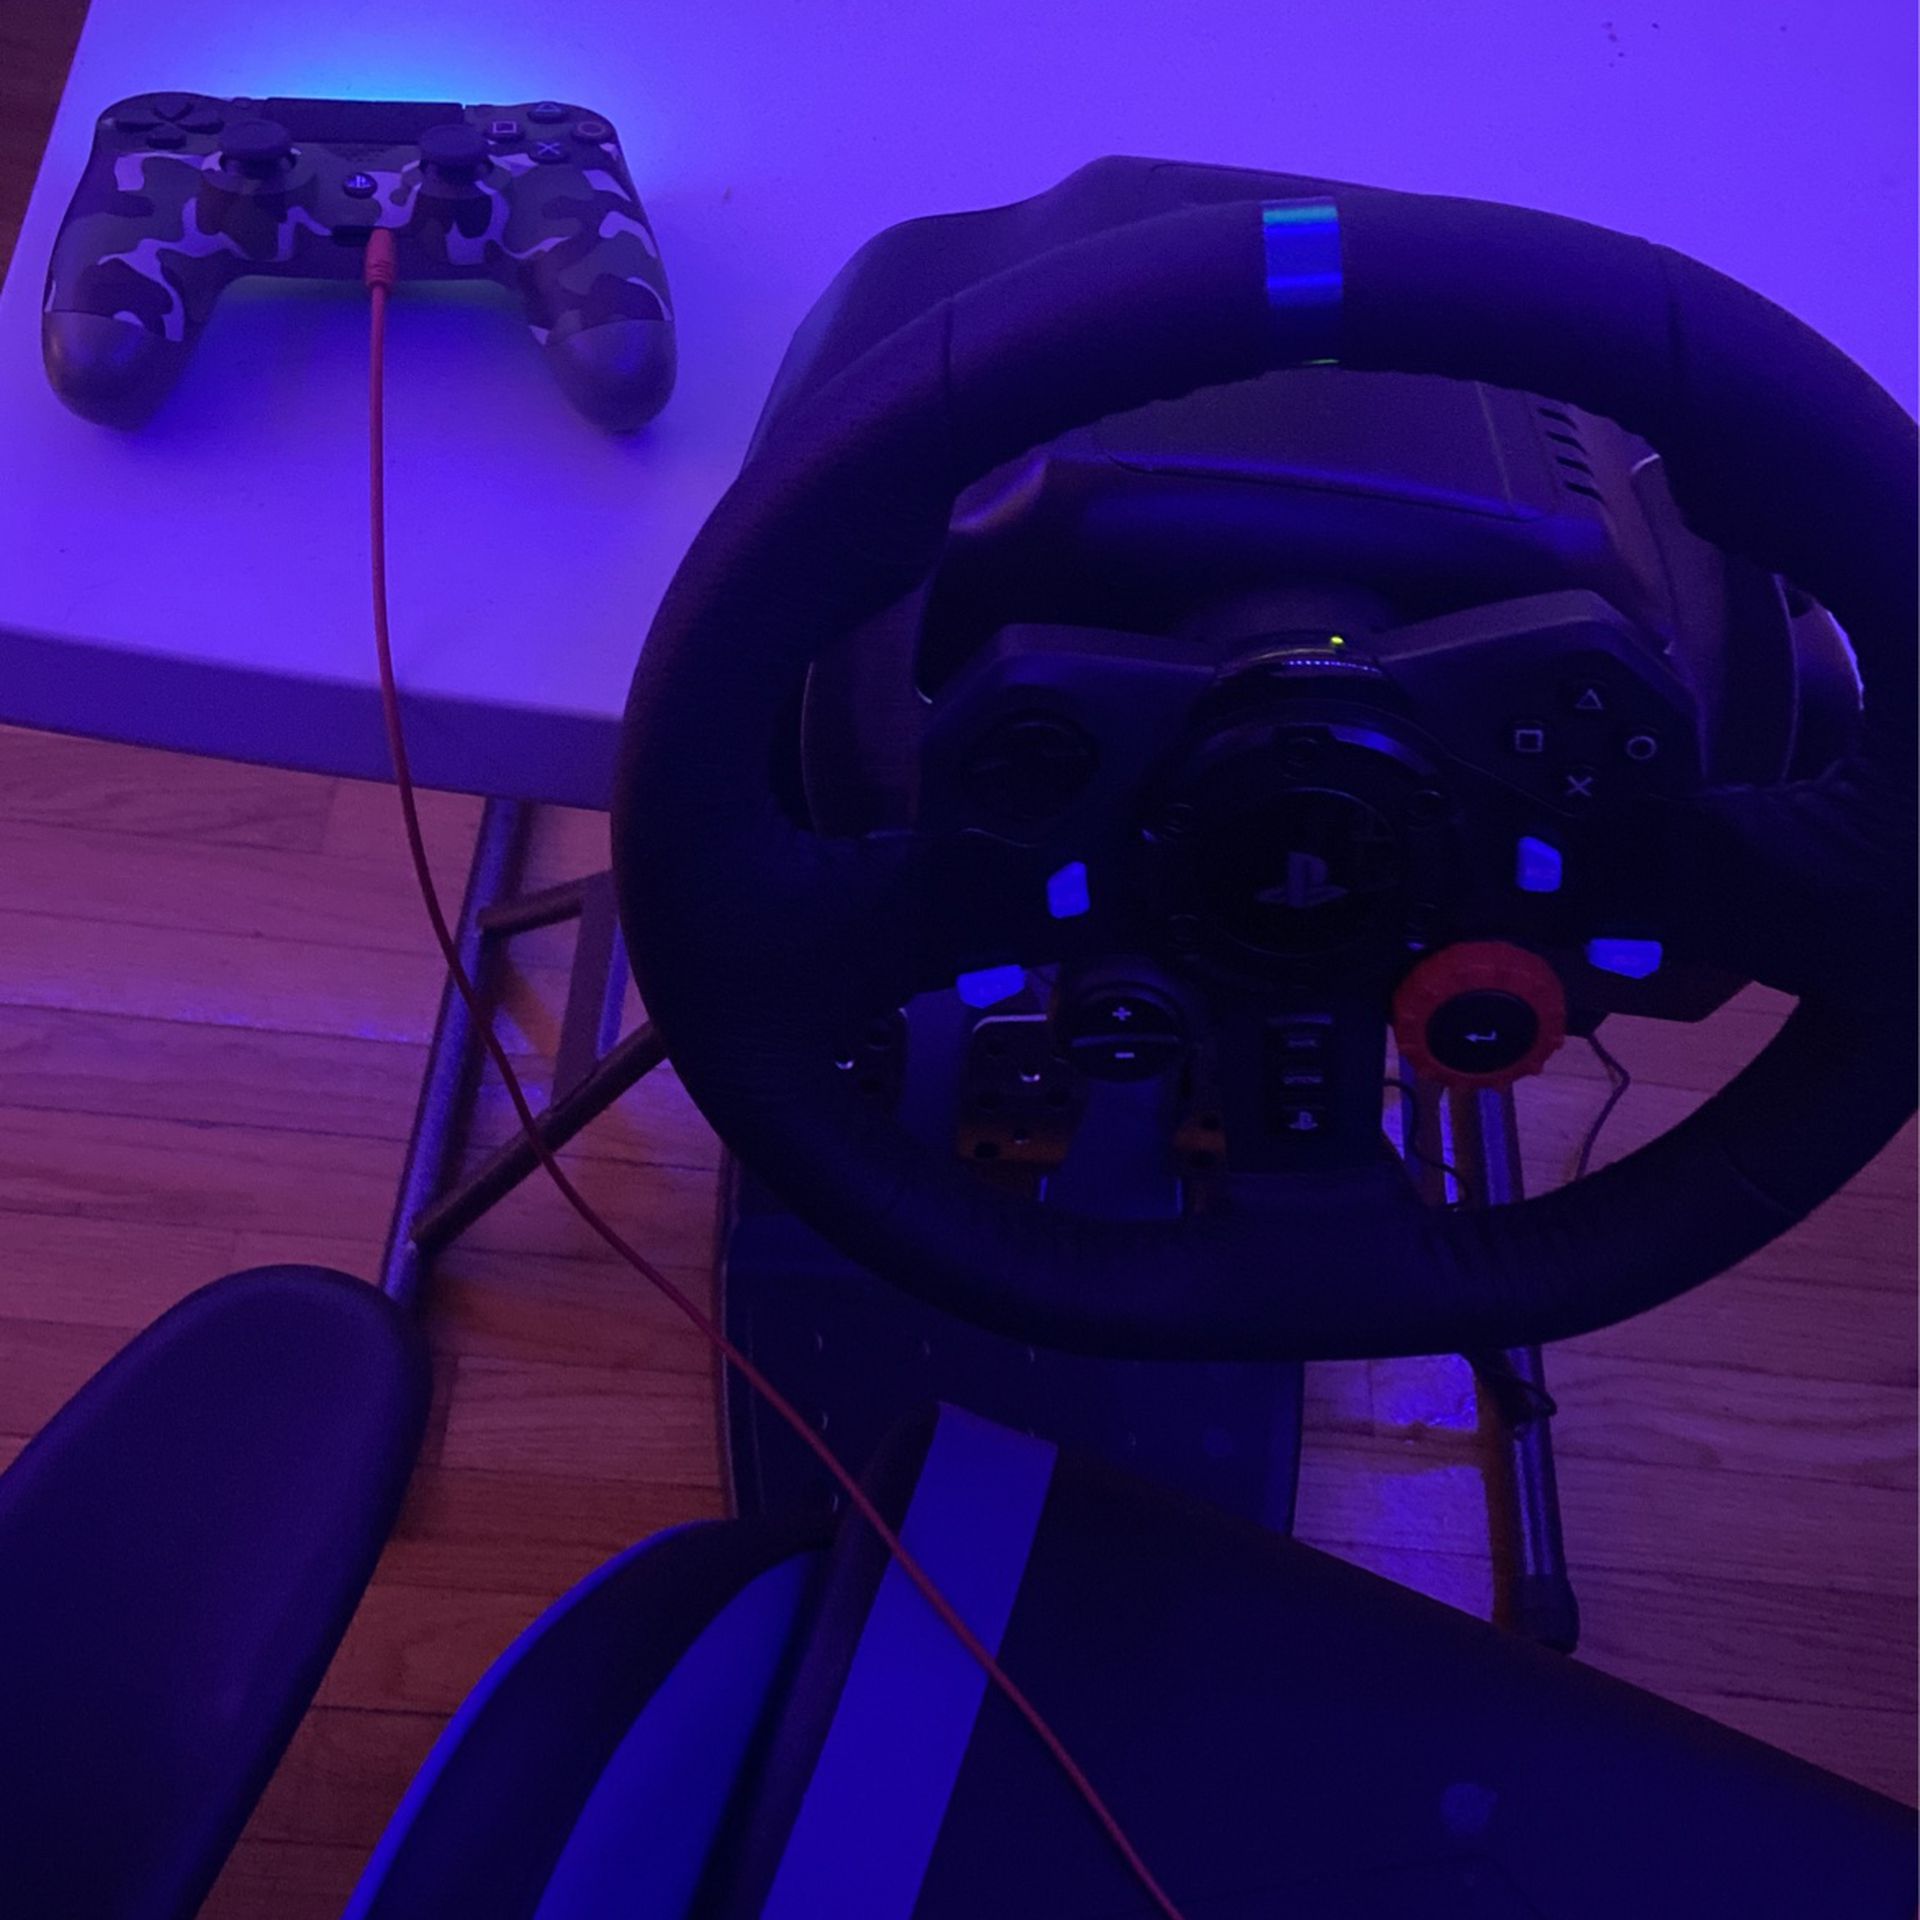 Ps4 With Steering Wheel